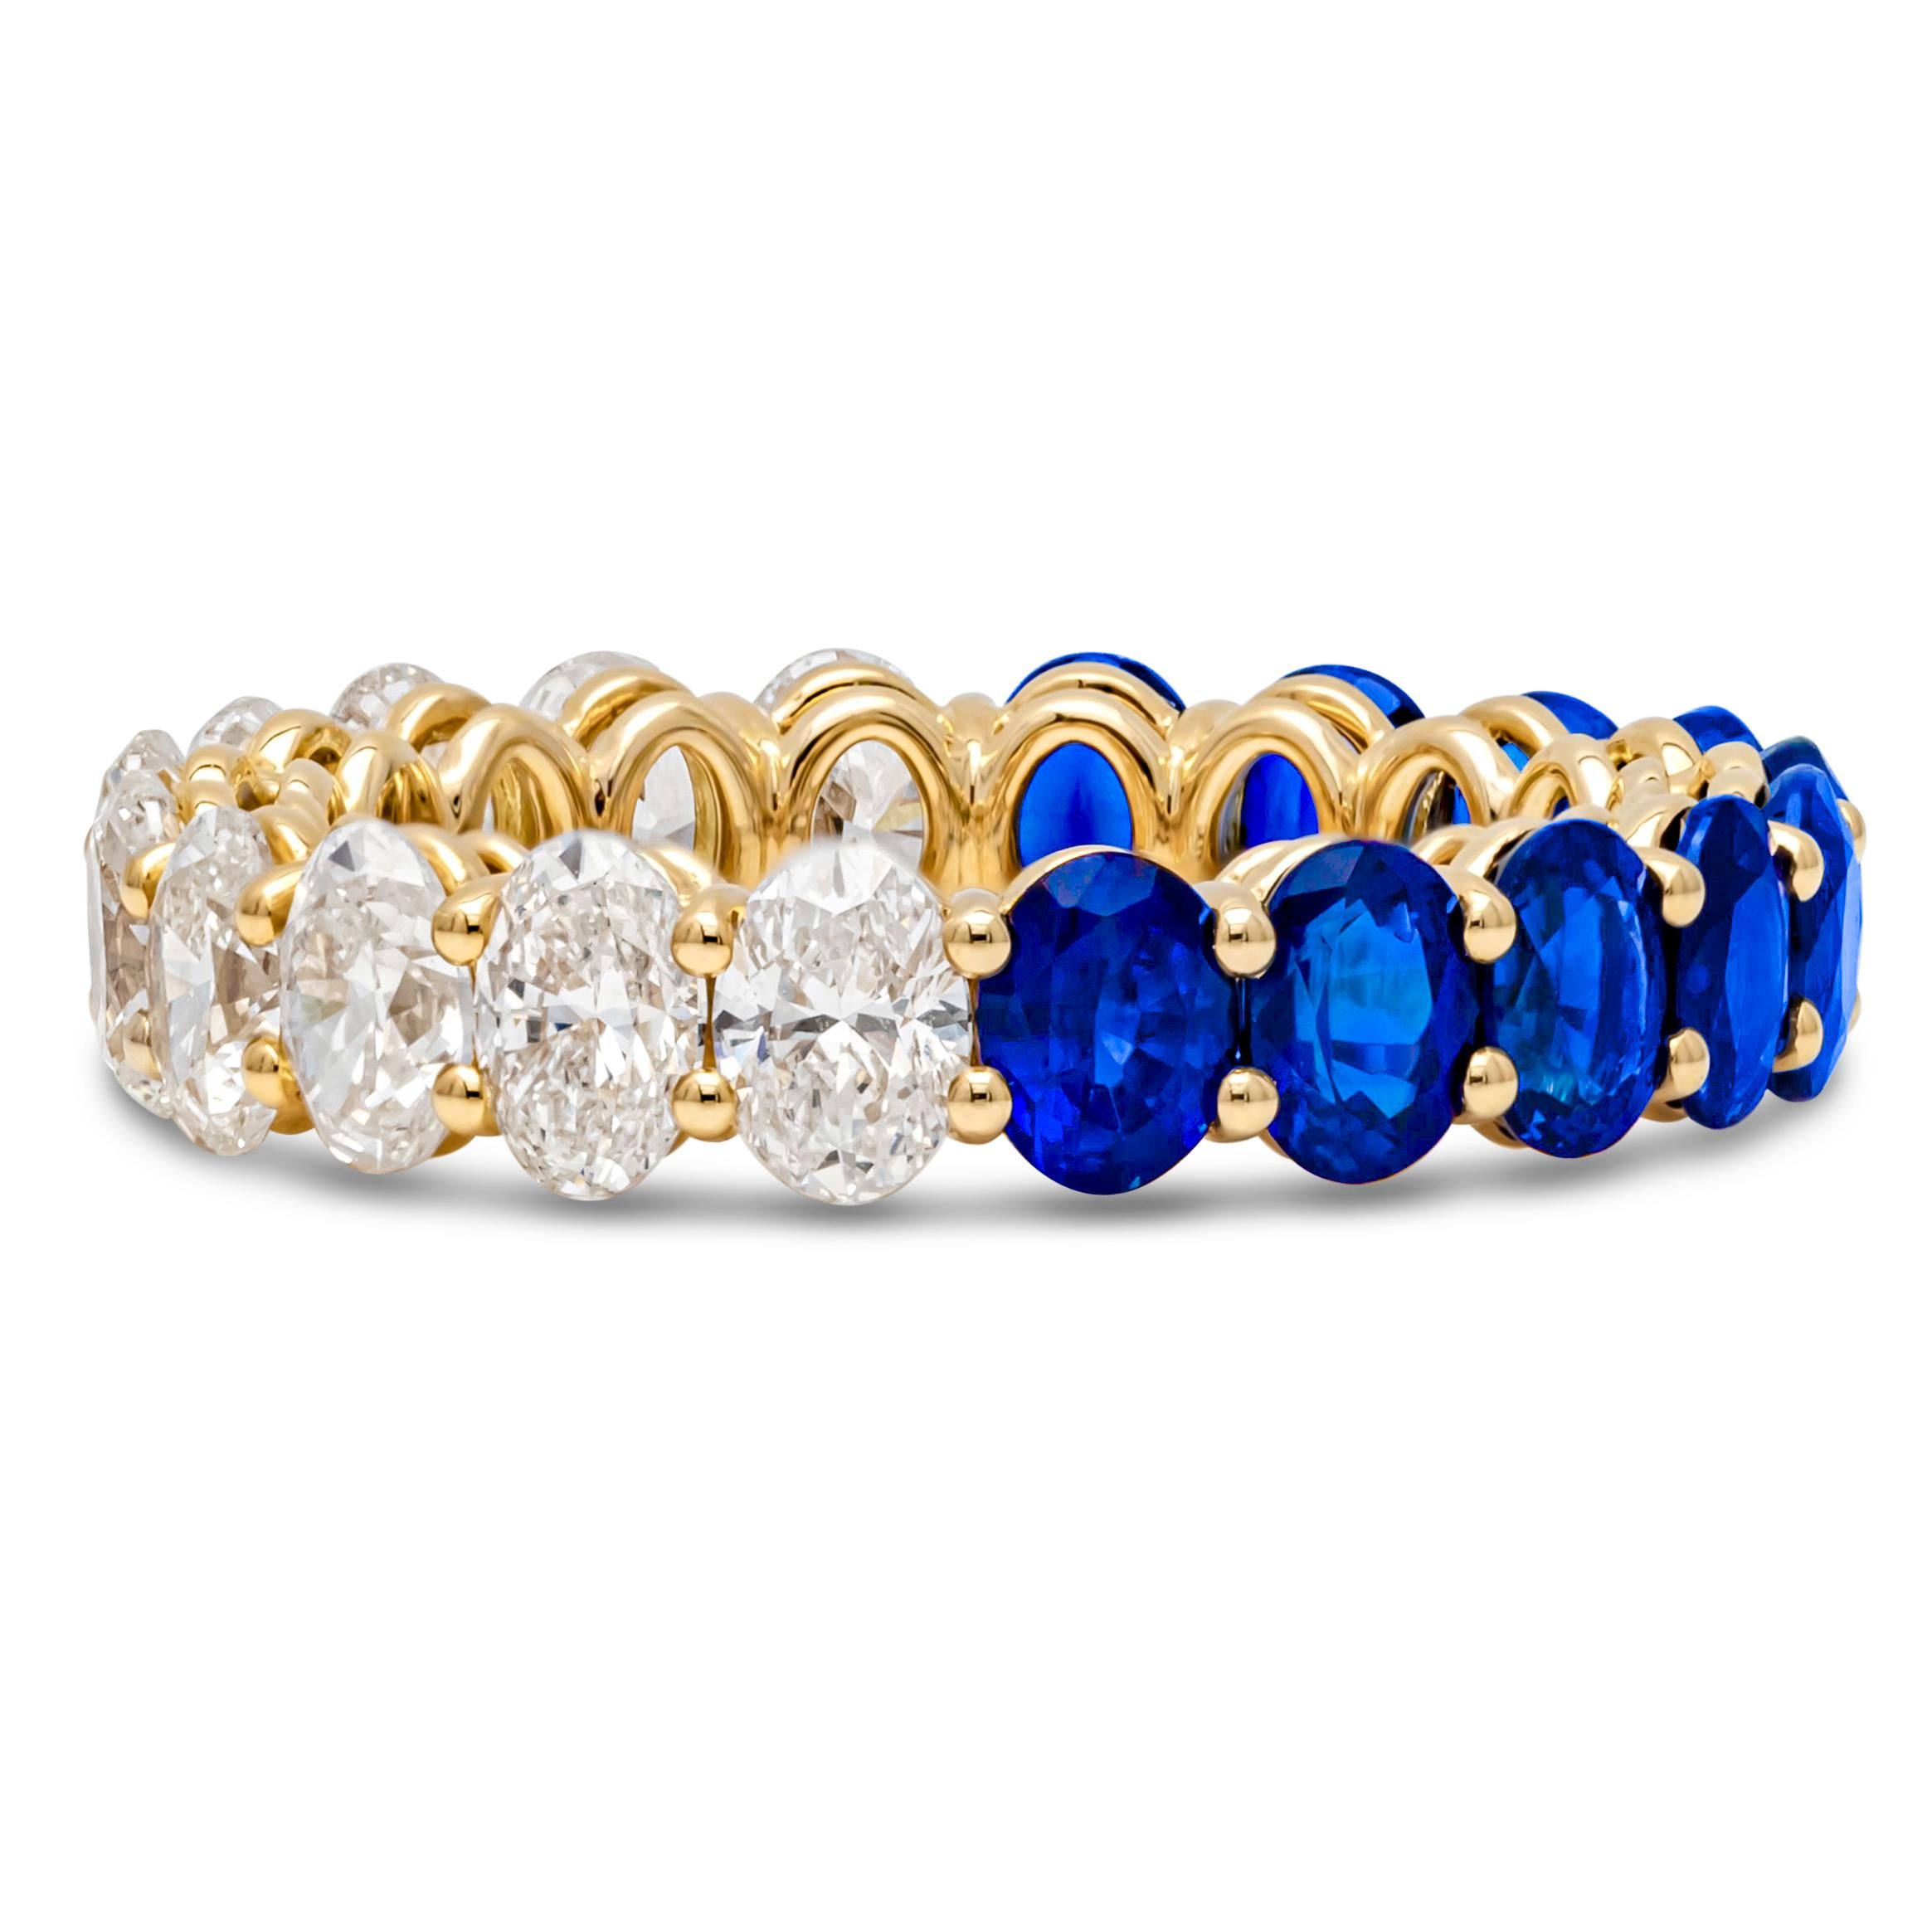 A beautiful and vibrant eternity wedding band style showcasing a color-rich 10 oval cut blue sapphire weighing 3.18 carats total and 10 brilliant oval cut diamonds weighing 2.36 carats total, set in a shared prong setting. Eternity set in an open